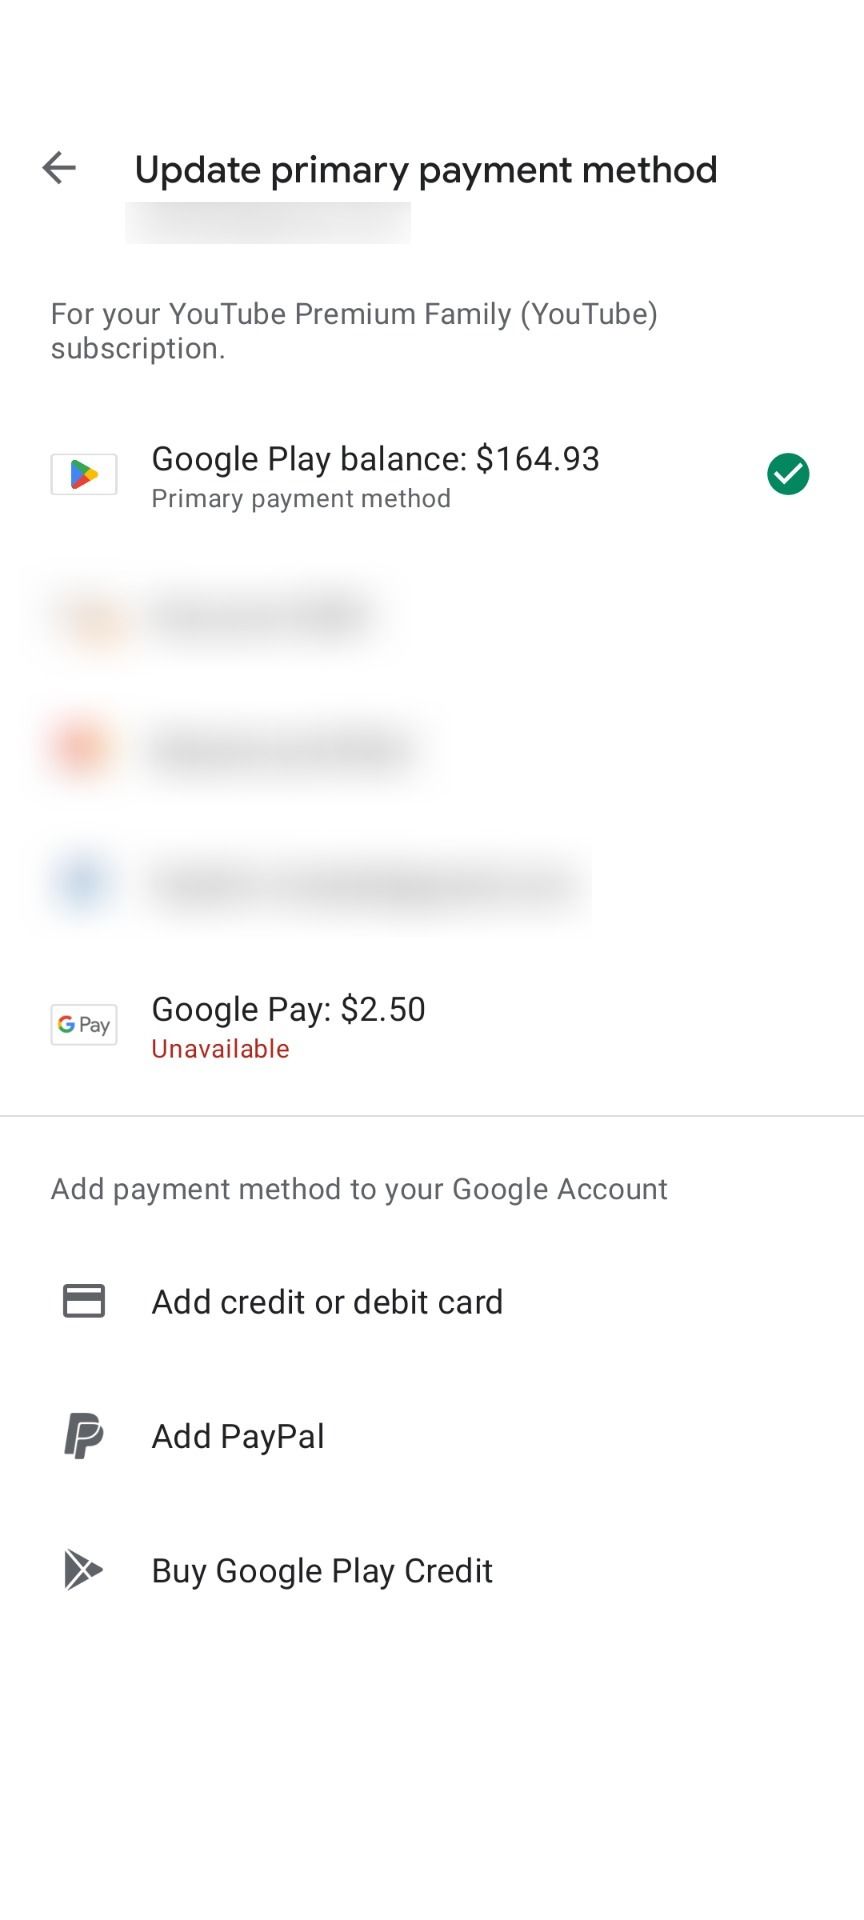 Updating the primary payment method for a subscription in the Google Play Store on mobile.